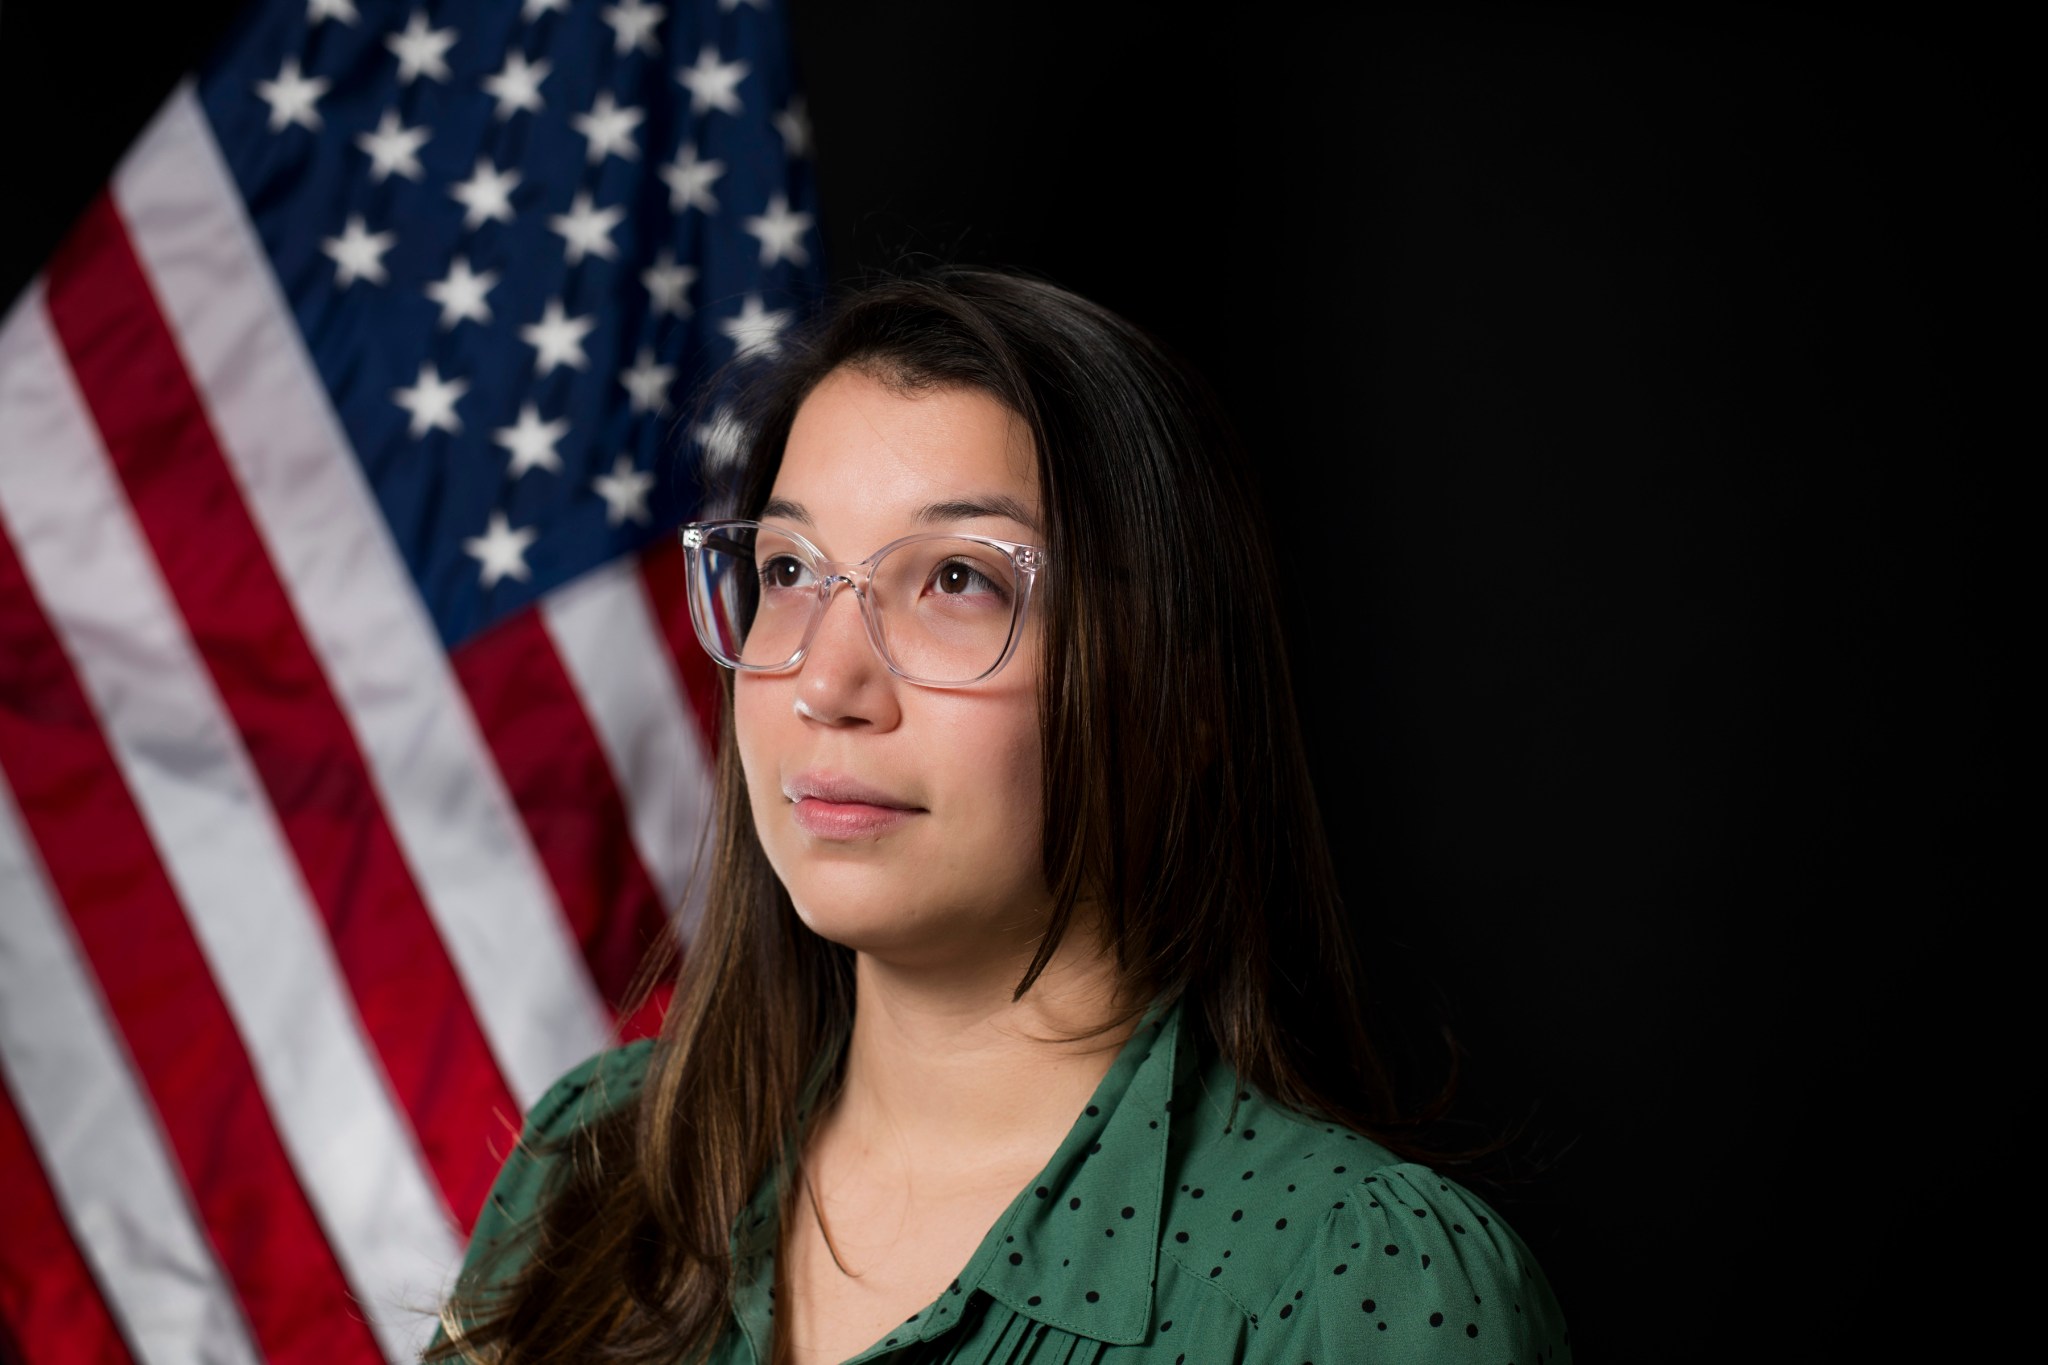 Sydney Khamphoune poses in front of an American flag. She is wearing a green shirt with clear glasses and is looking into the distance to the left of the camera.